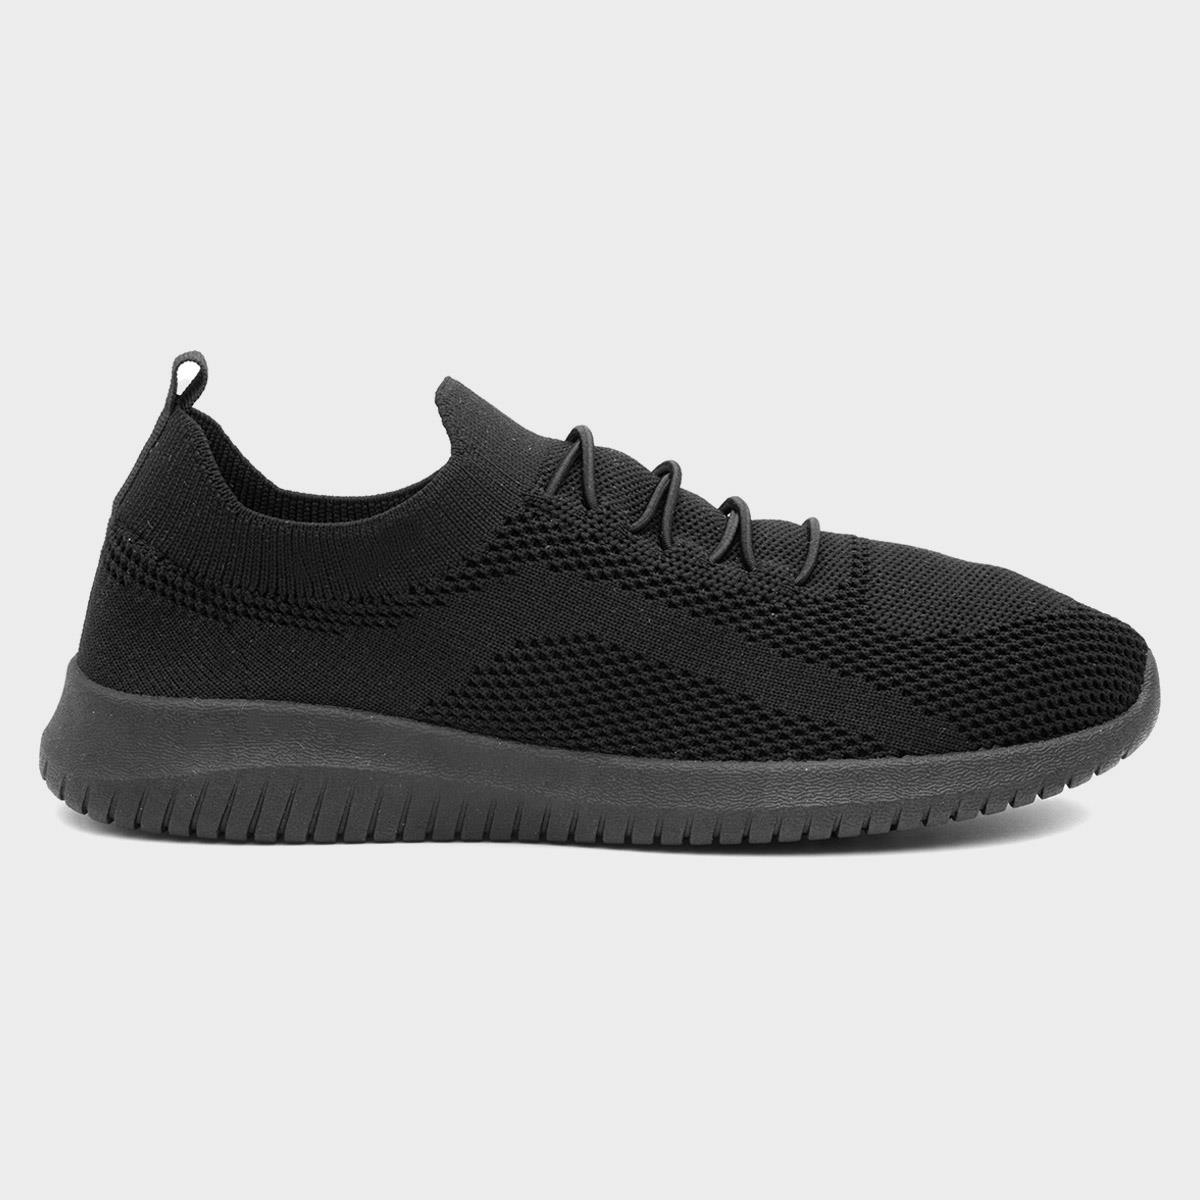 Lilley Darcy Womens Black Knitted Trainer-125107 | Shoe Zone